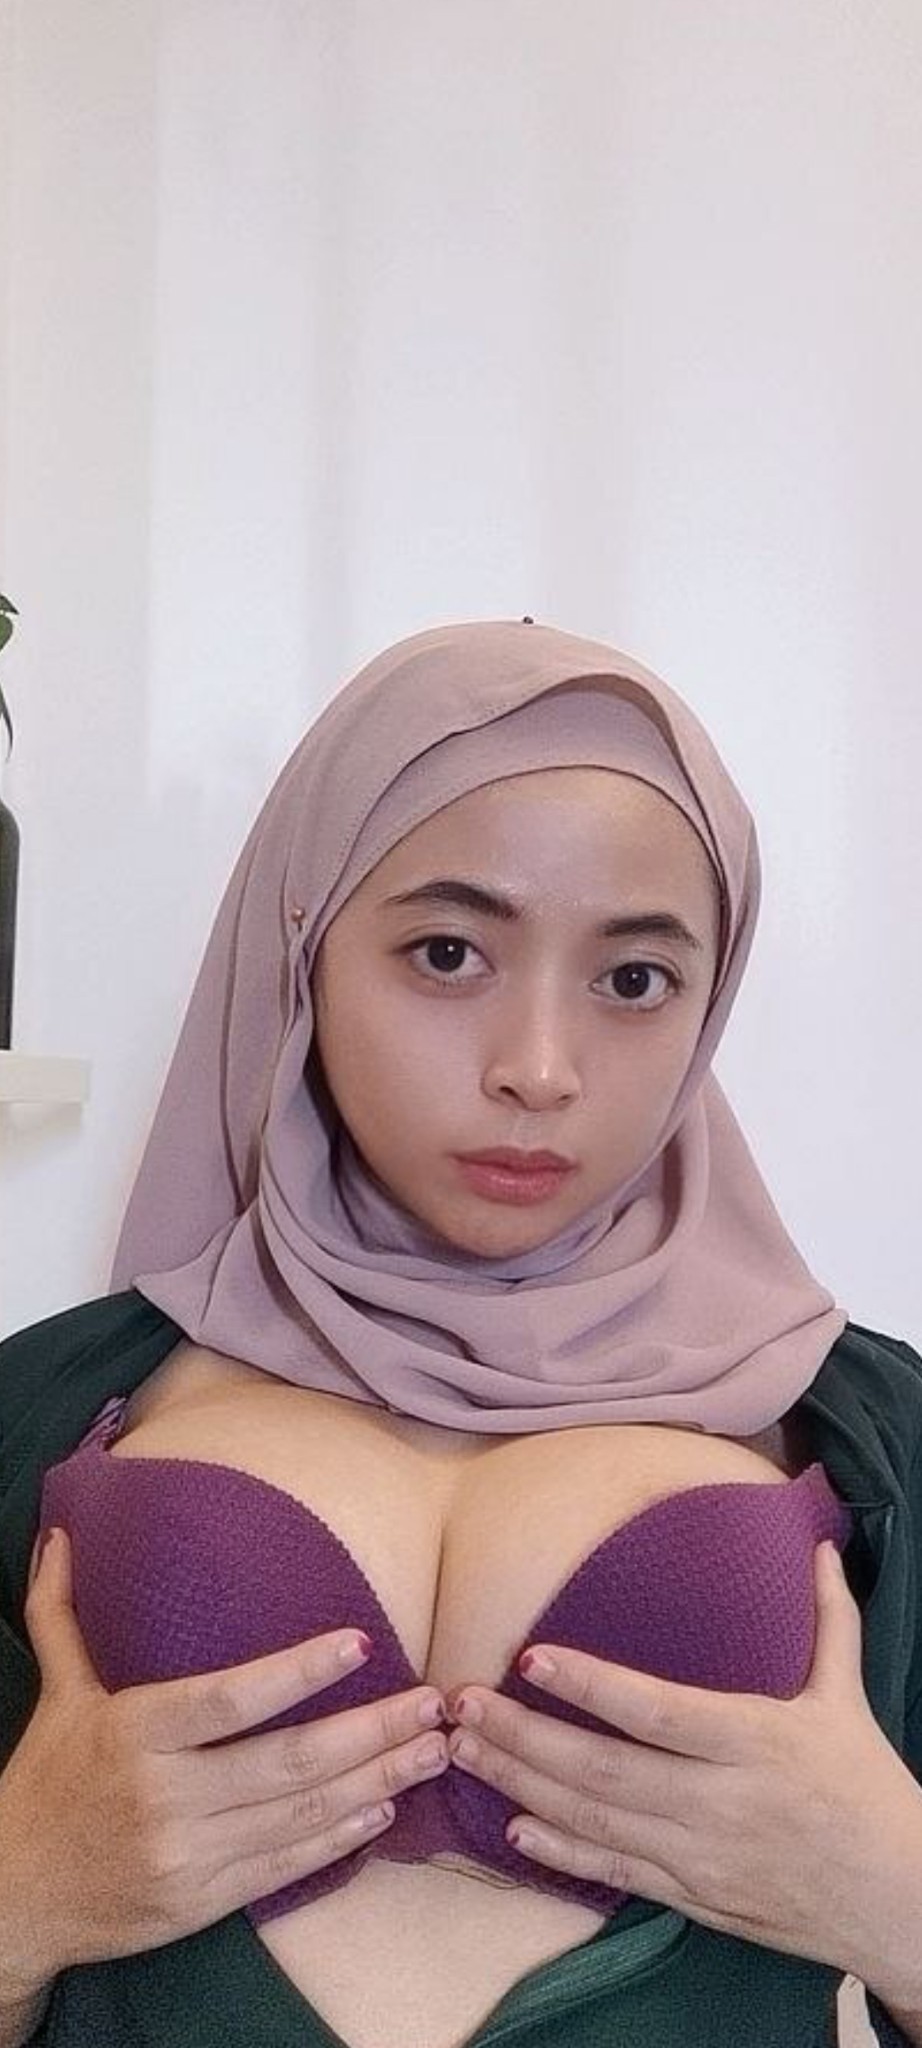 Malay onlyfans